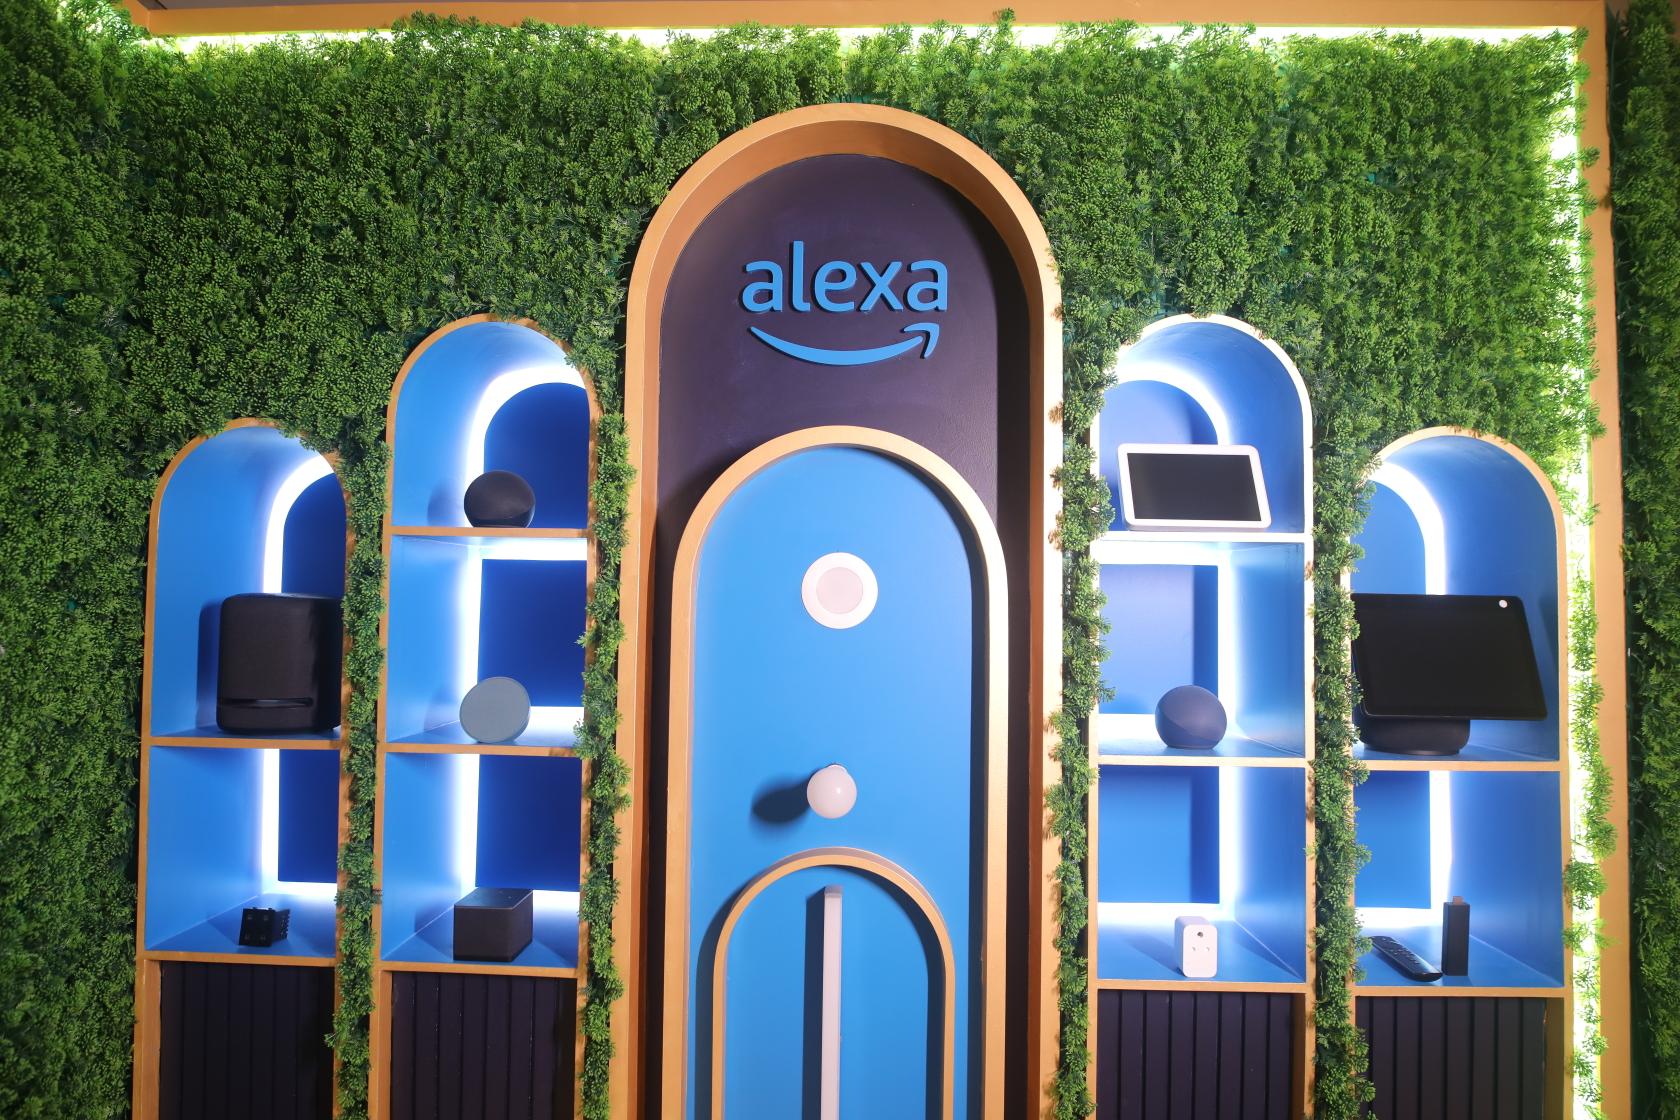 Mumbai, India, 8 February 2024: Alexa has been a part of Indian households for six years now, making daily tasks simpler and homes smarter. Devices with Alexa (ex. Echo smart speakers, or Fire TV Stick) have been purchased by customers